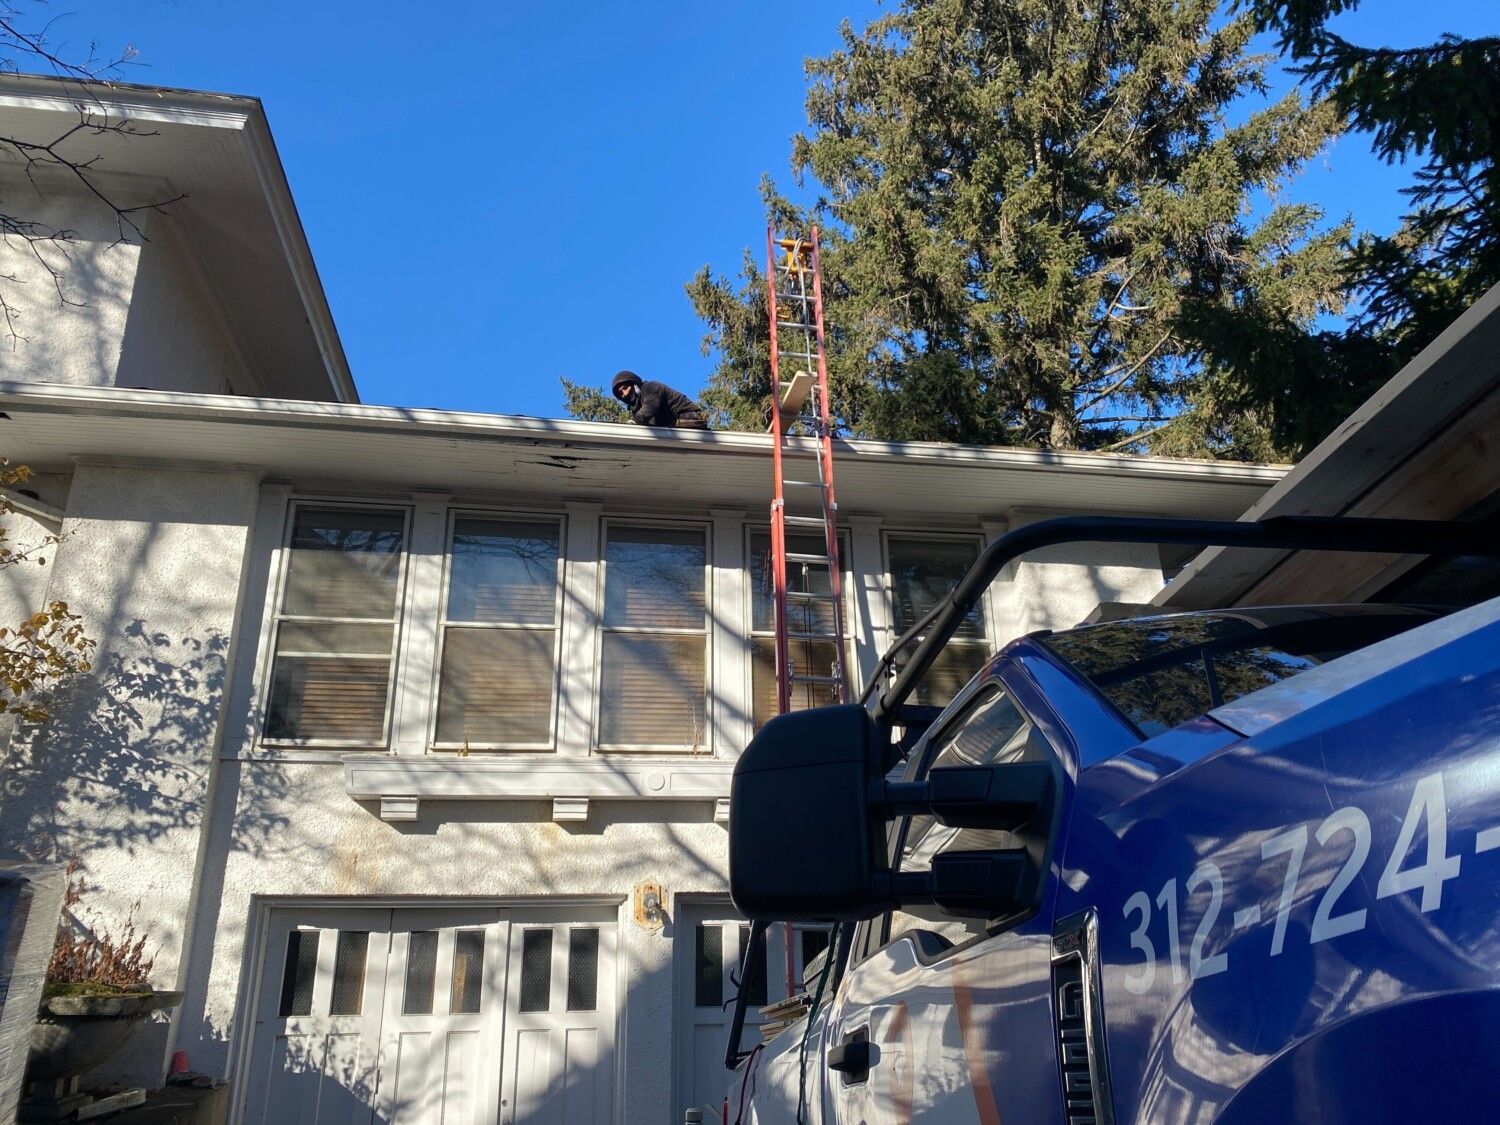 A man on a ladder is working on the roof of a house.